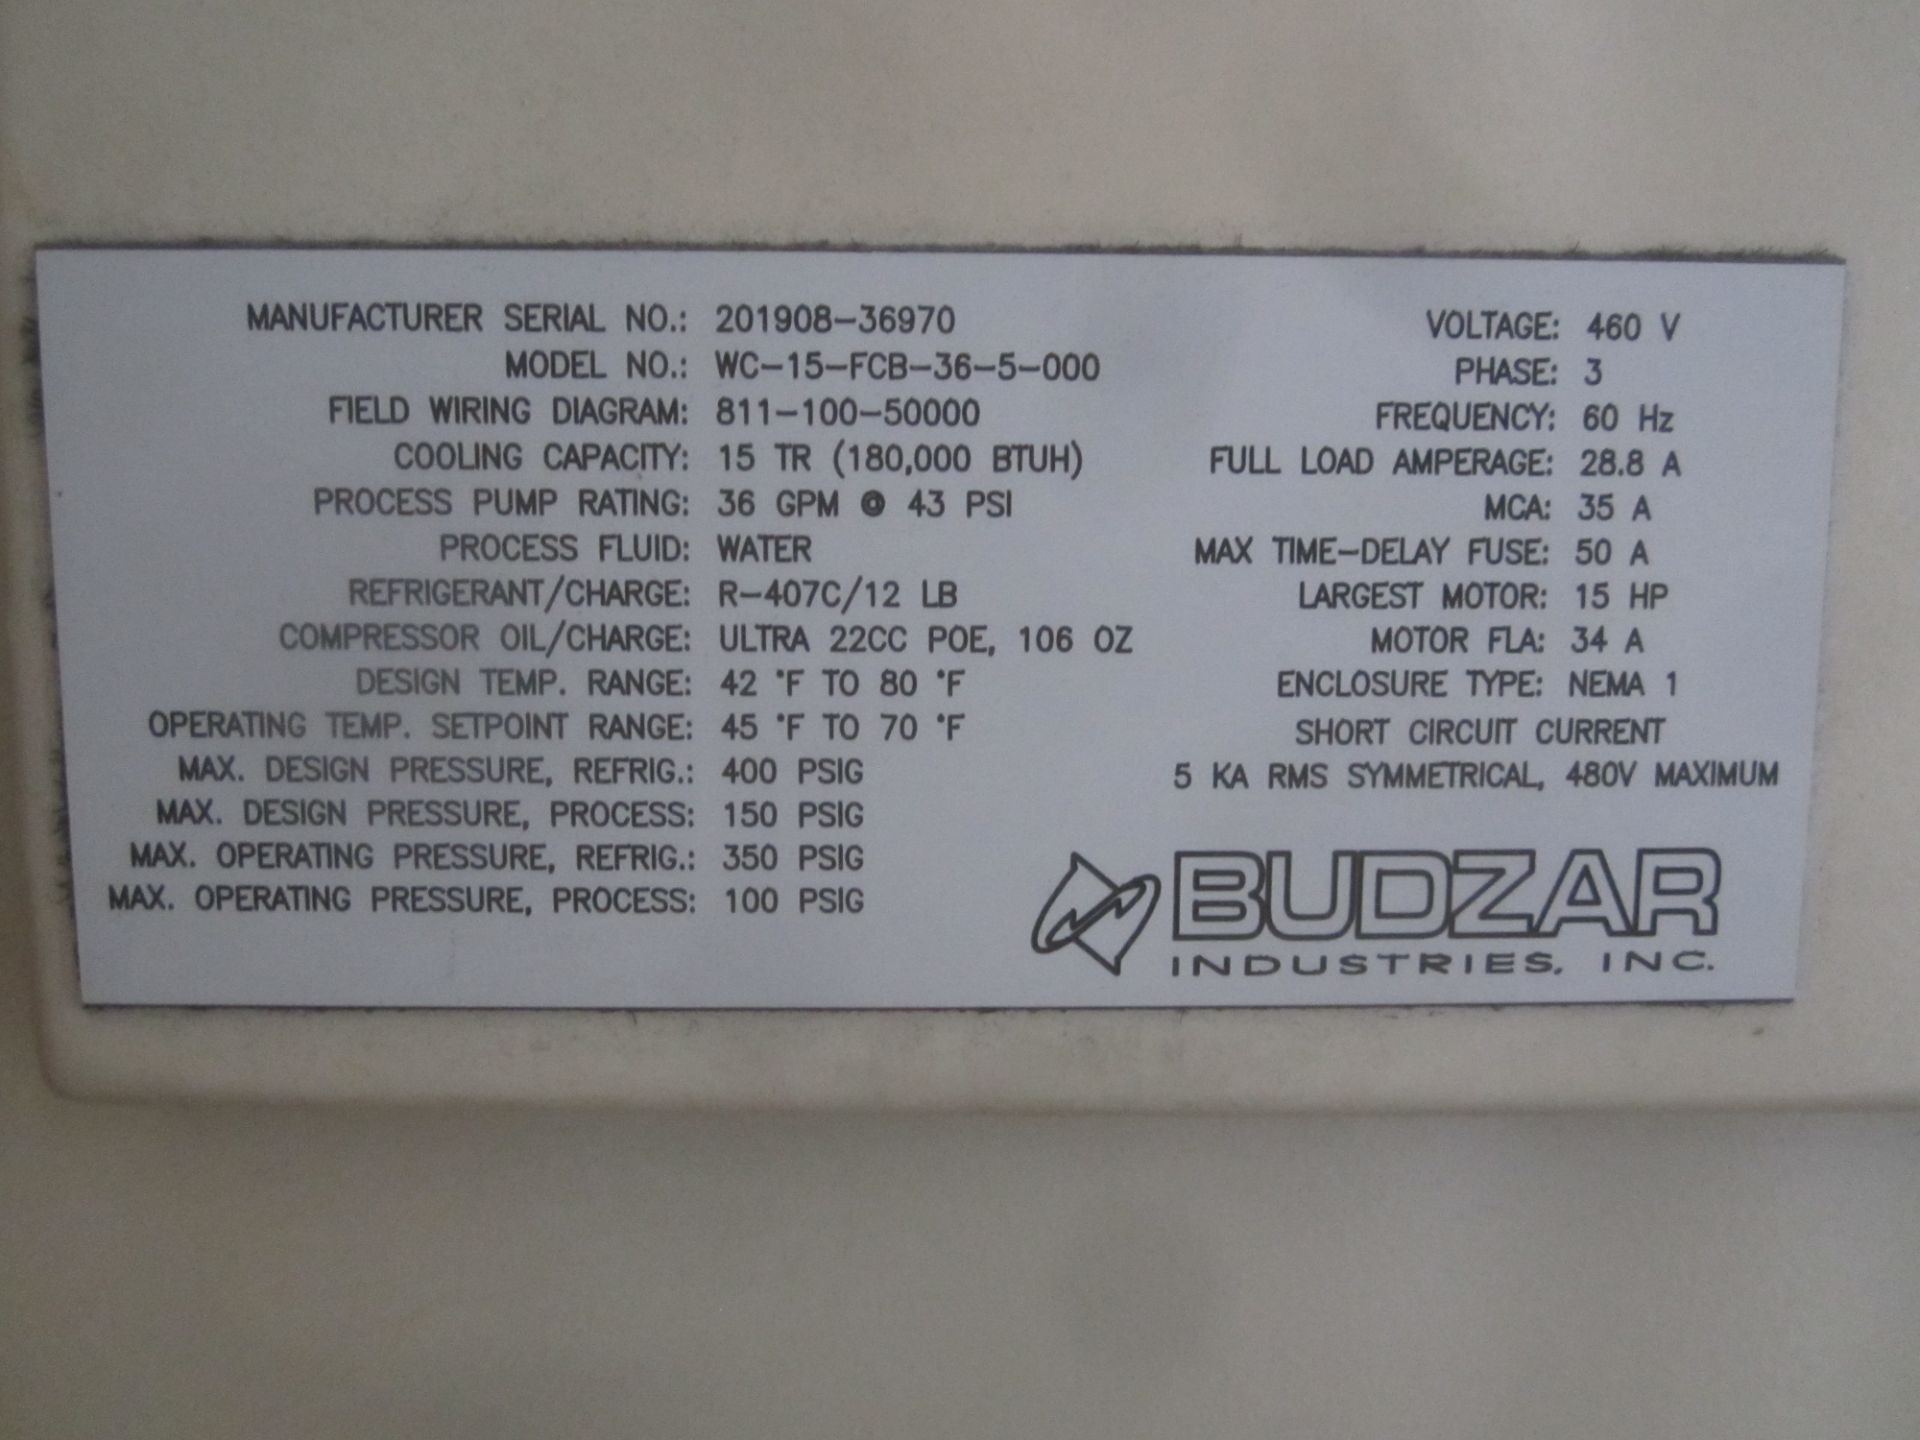 Budzar Model WC-15-FCB-36-5-000 Water Cooled Portable Chiller, s/n 201908-36970, 460/3/60 - Image 4 of 4